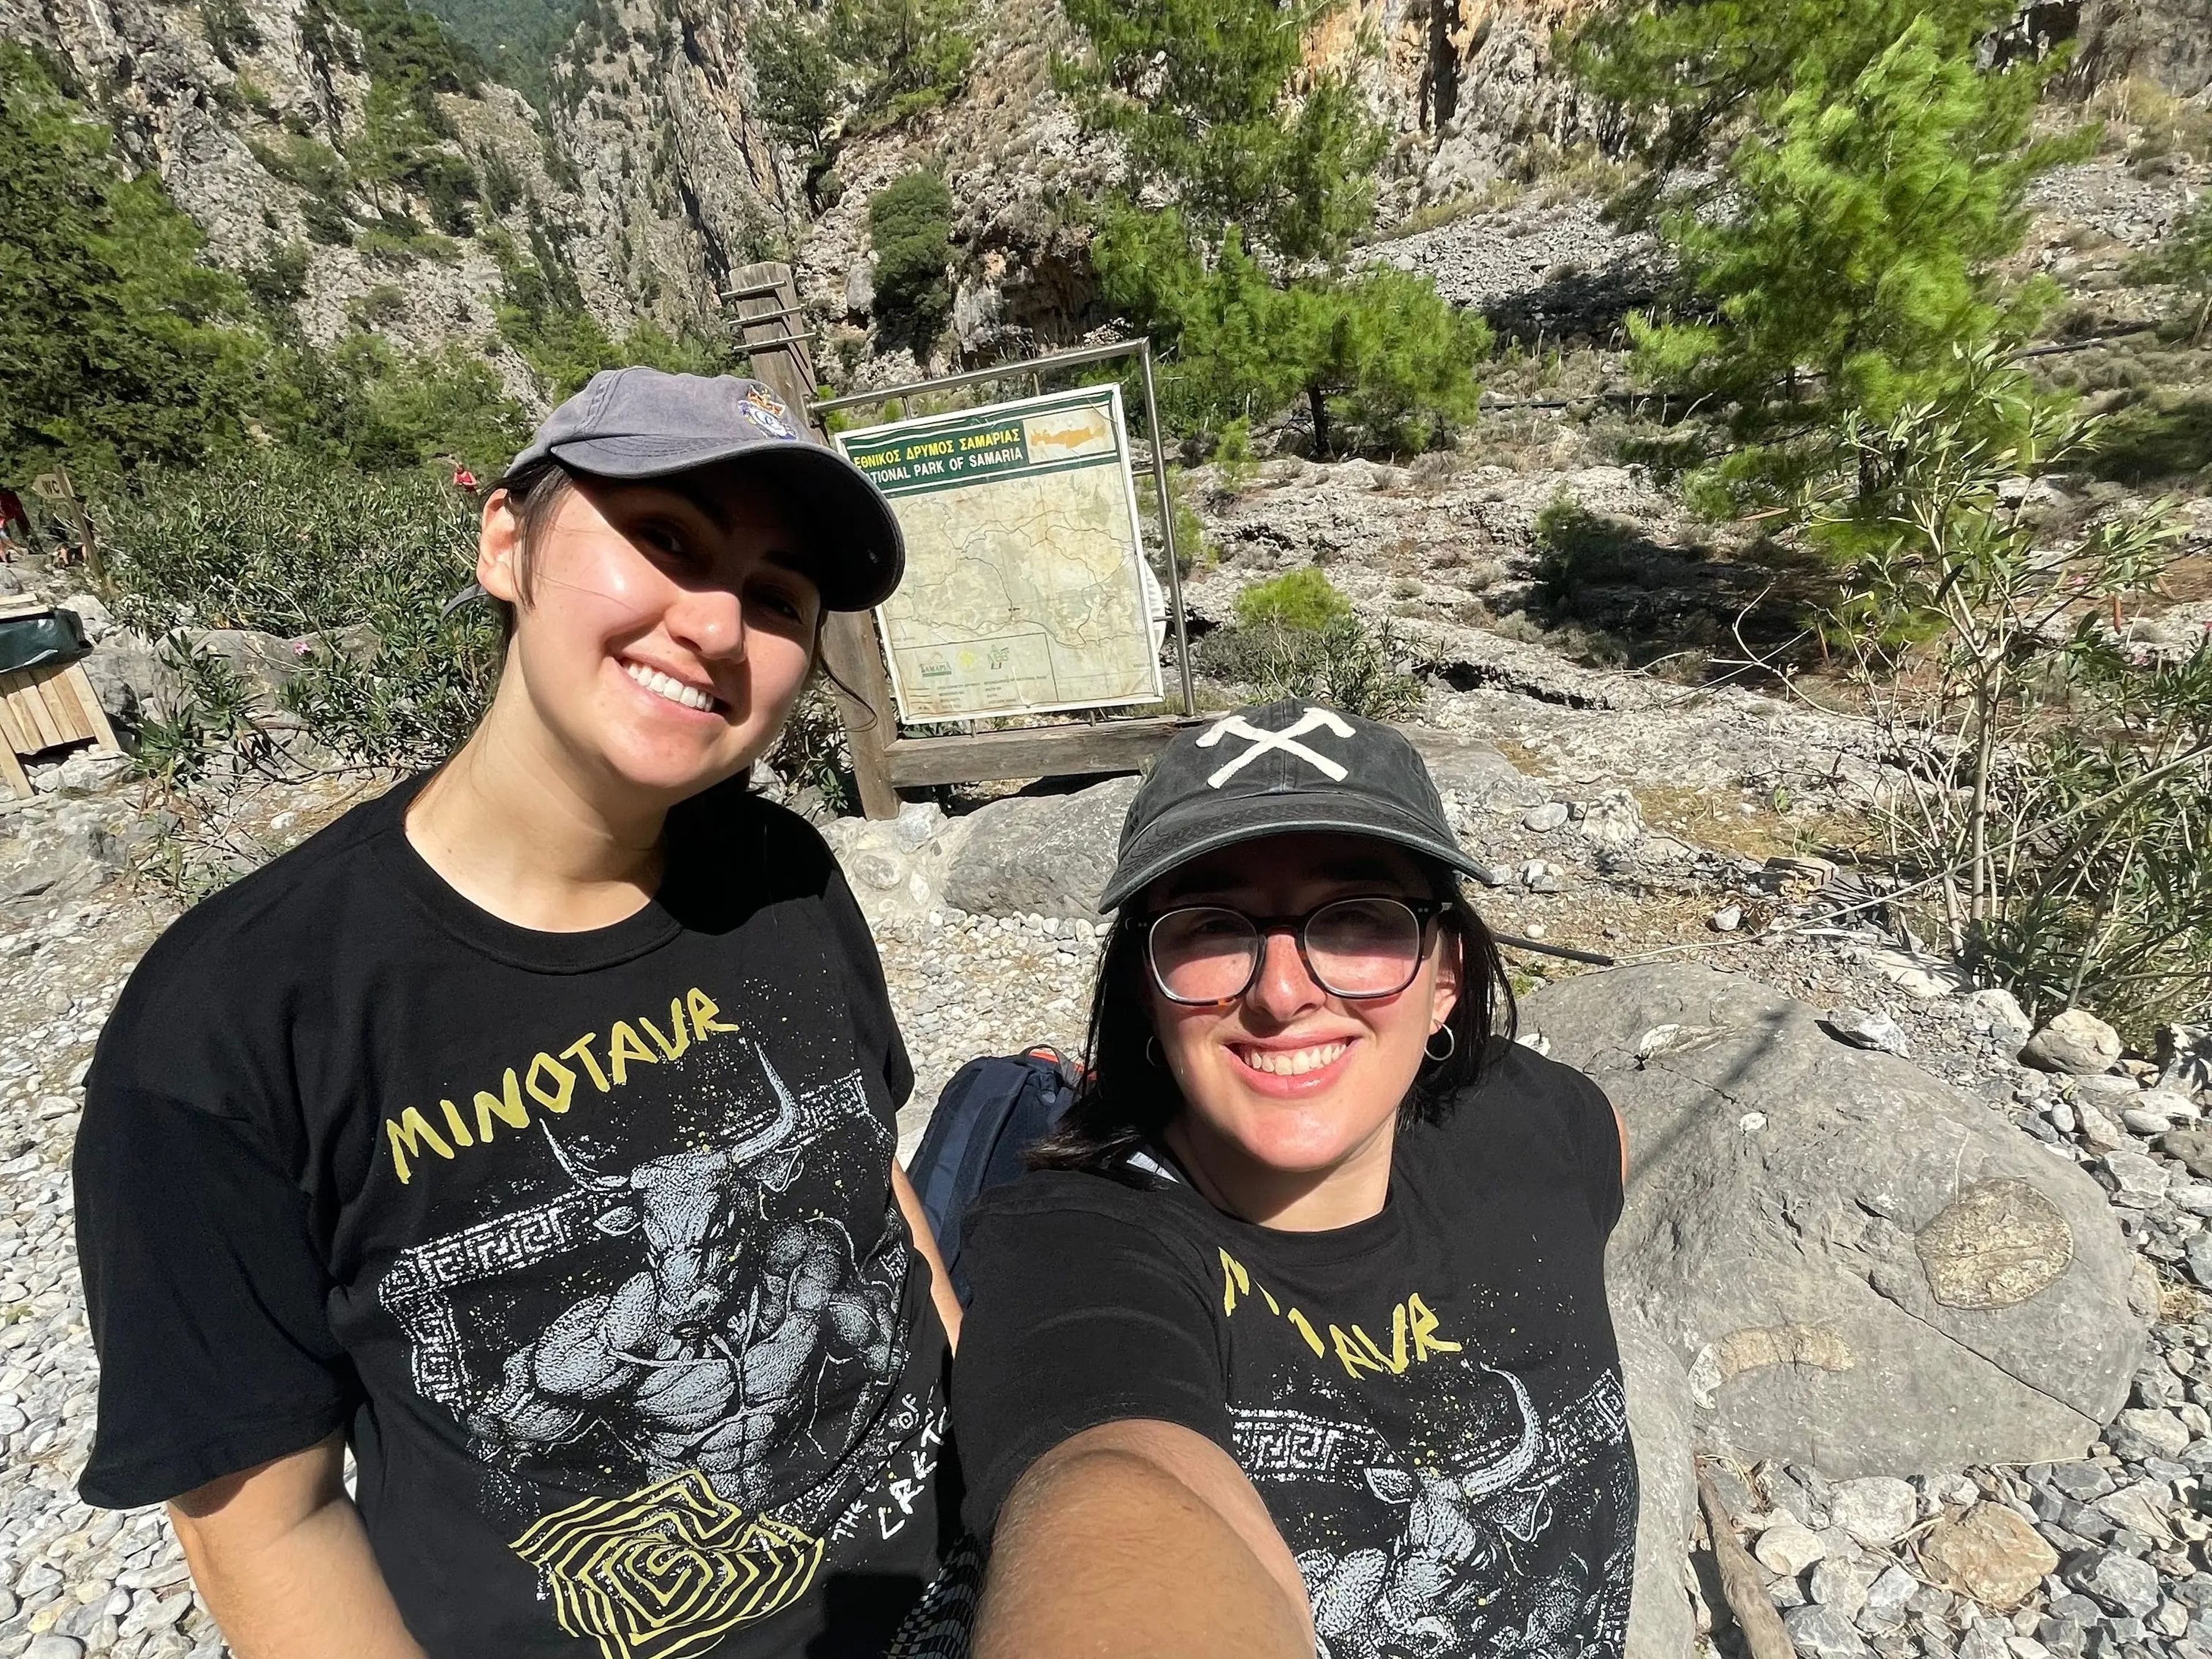 hannah and a friend posing for a selfie at a trail head for samaria George in create greece